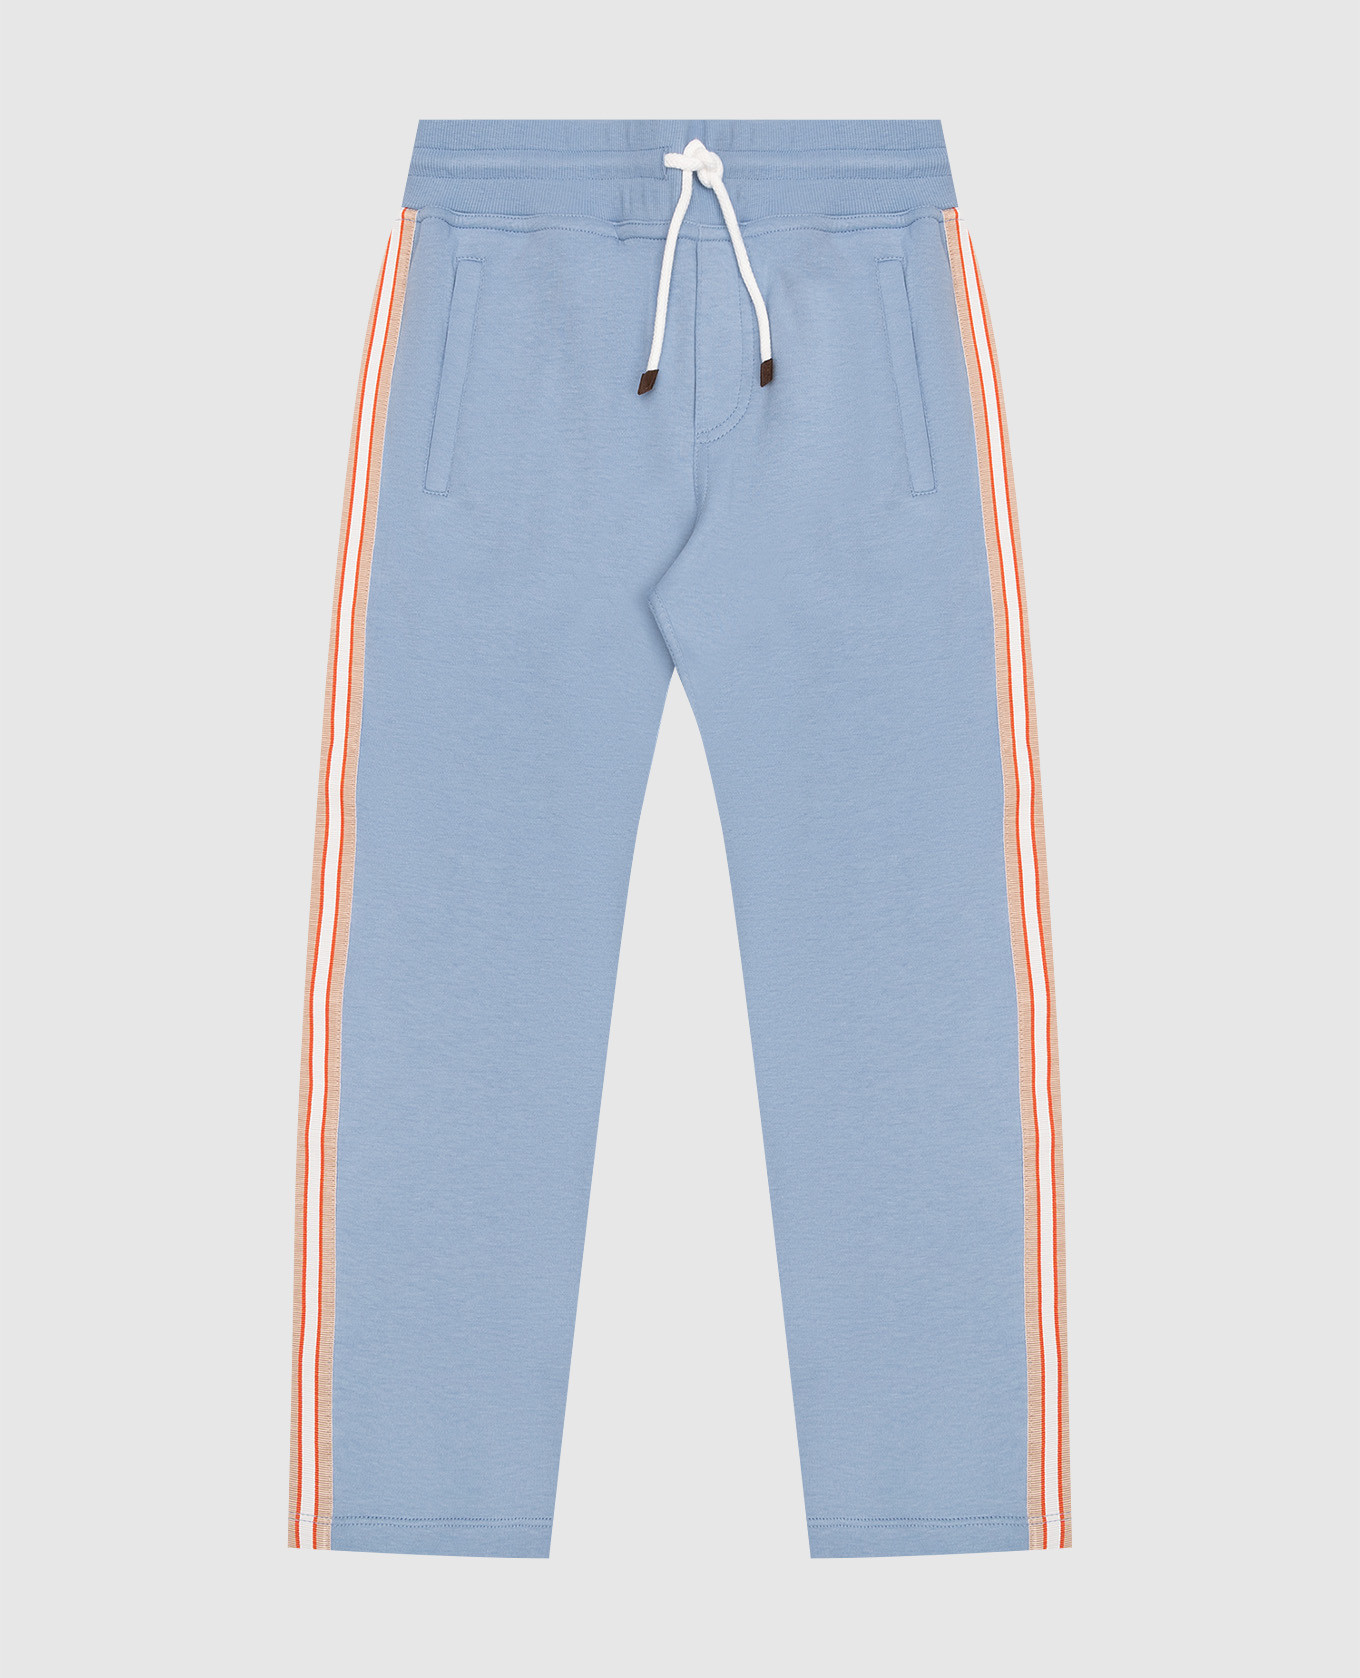 Children's blue sports pants with stripes